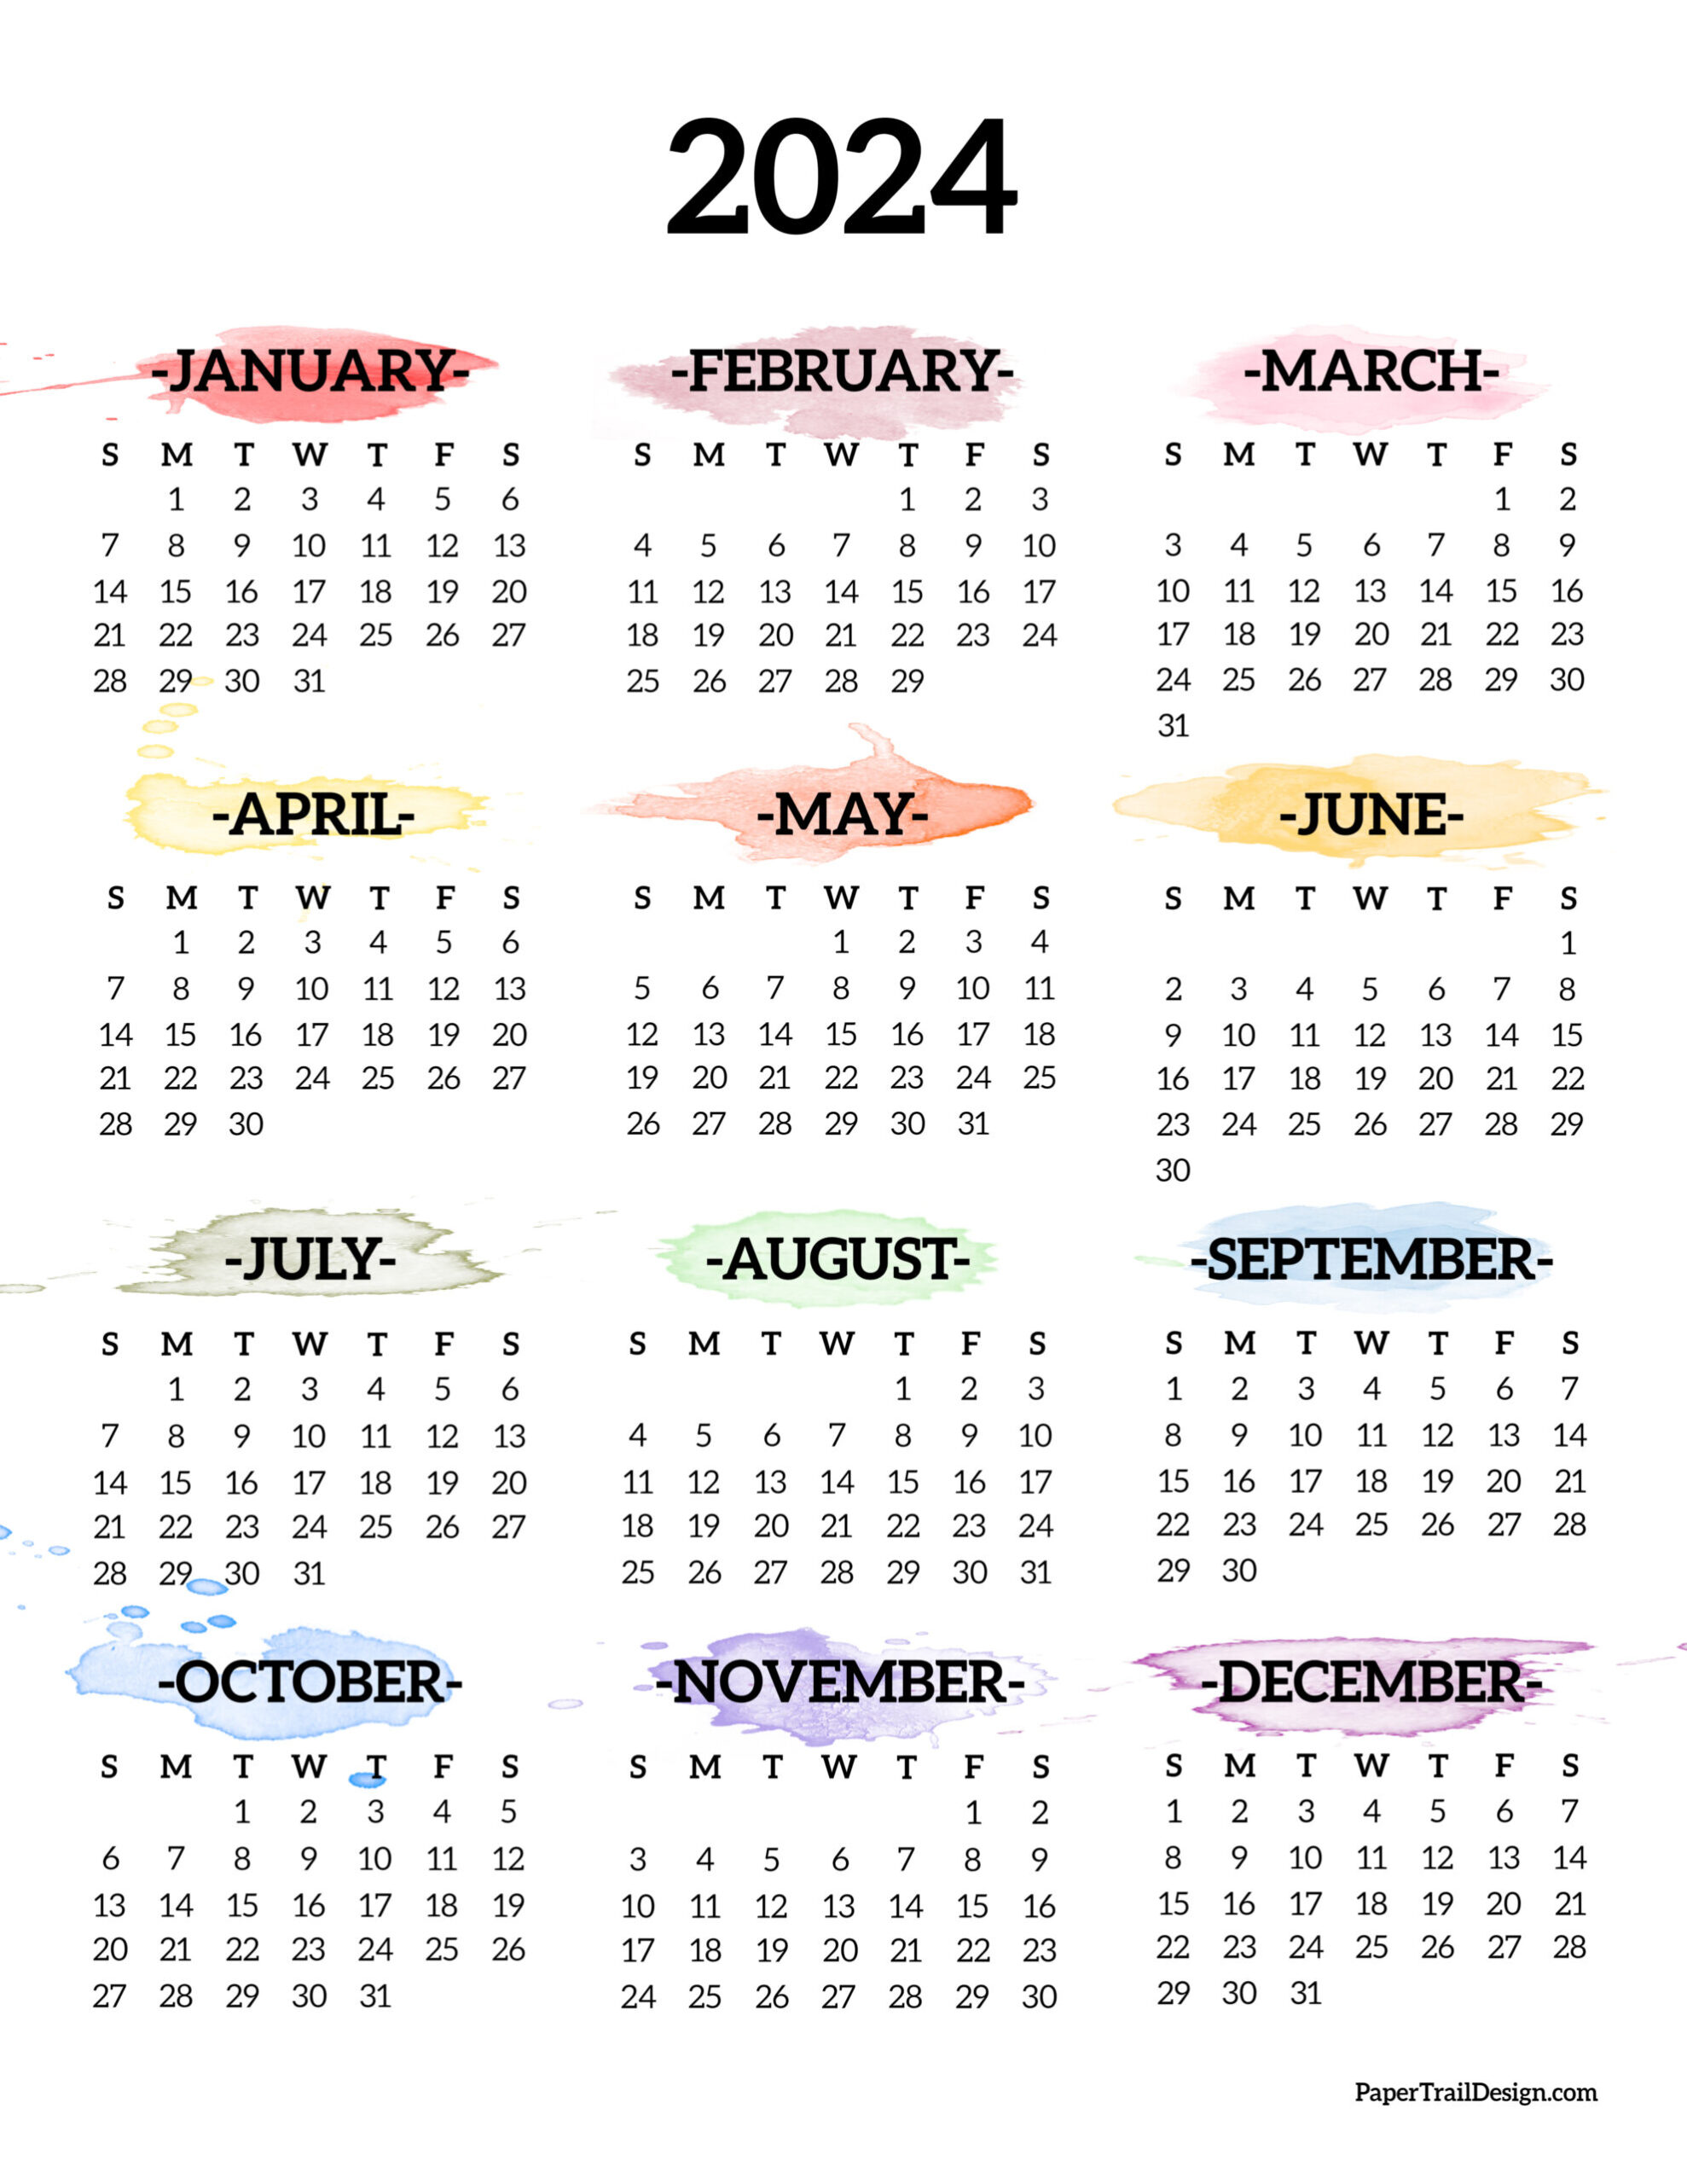 Calendar 2024 Printable One Page - Paper Trail Design for 1 Page 2024 Calendar Printable